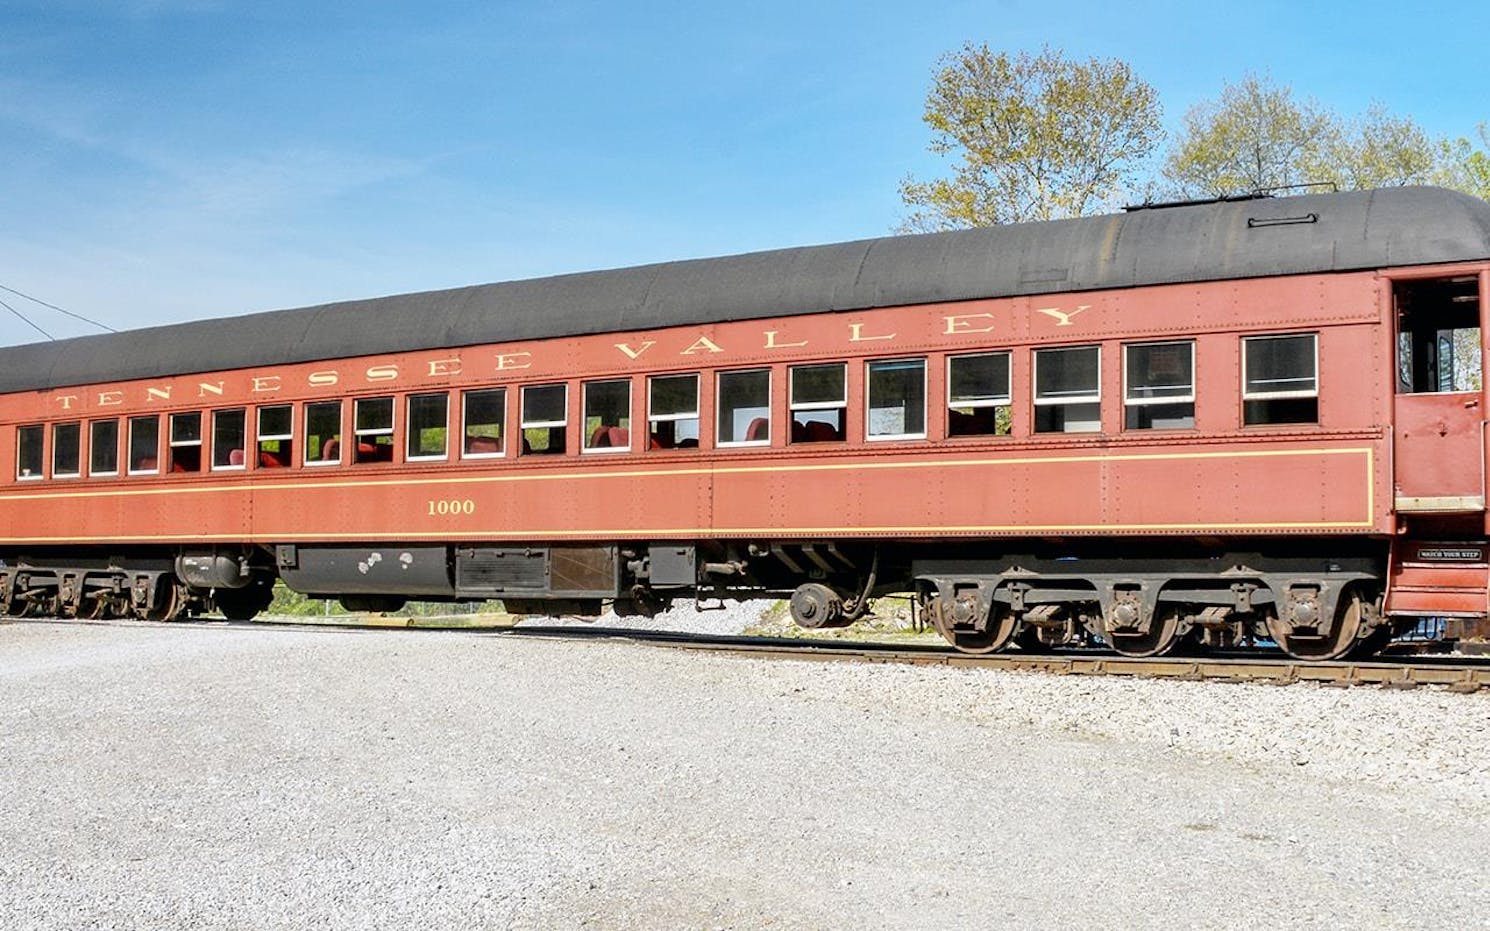 The Southern Railway 1000 is a heavyweight coach originally built in 1925 by the Pullman Company.